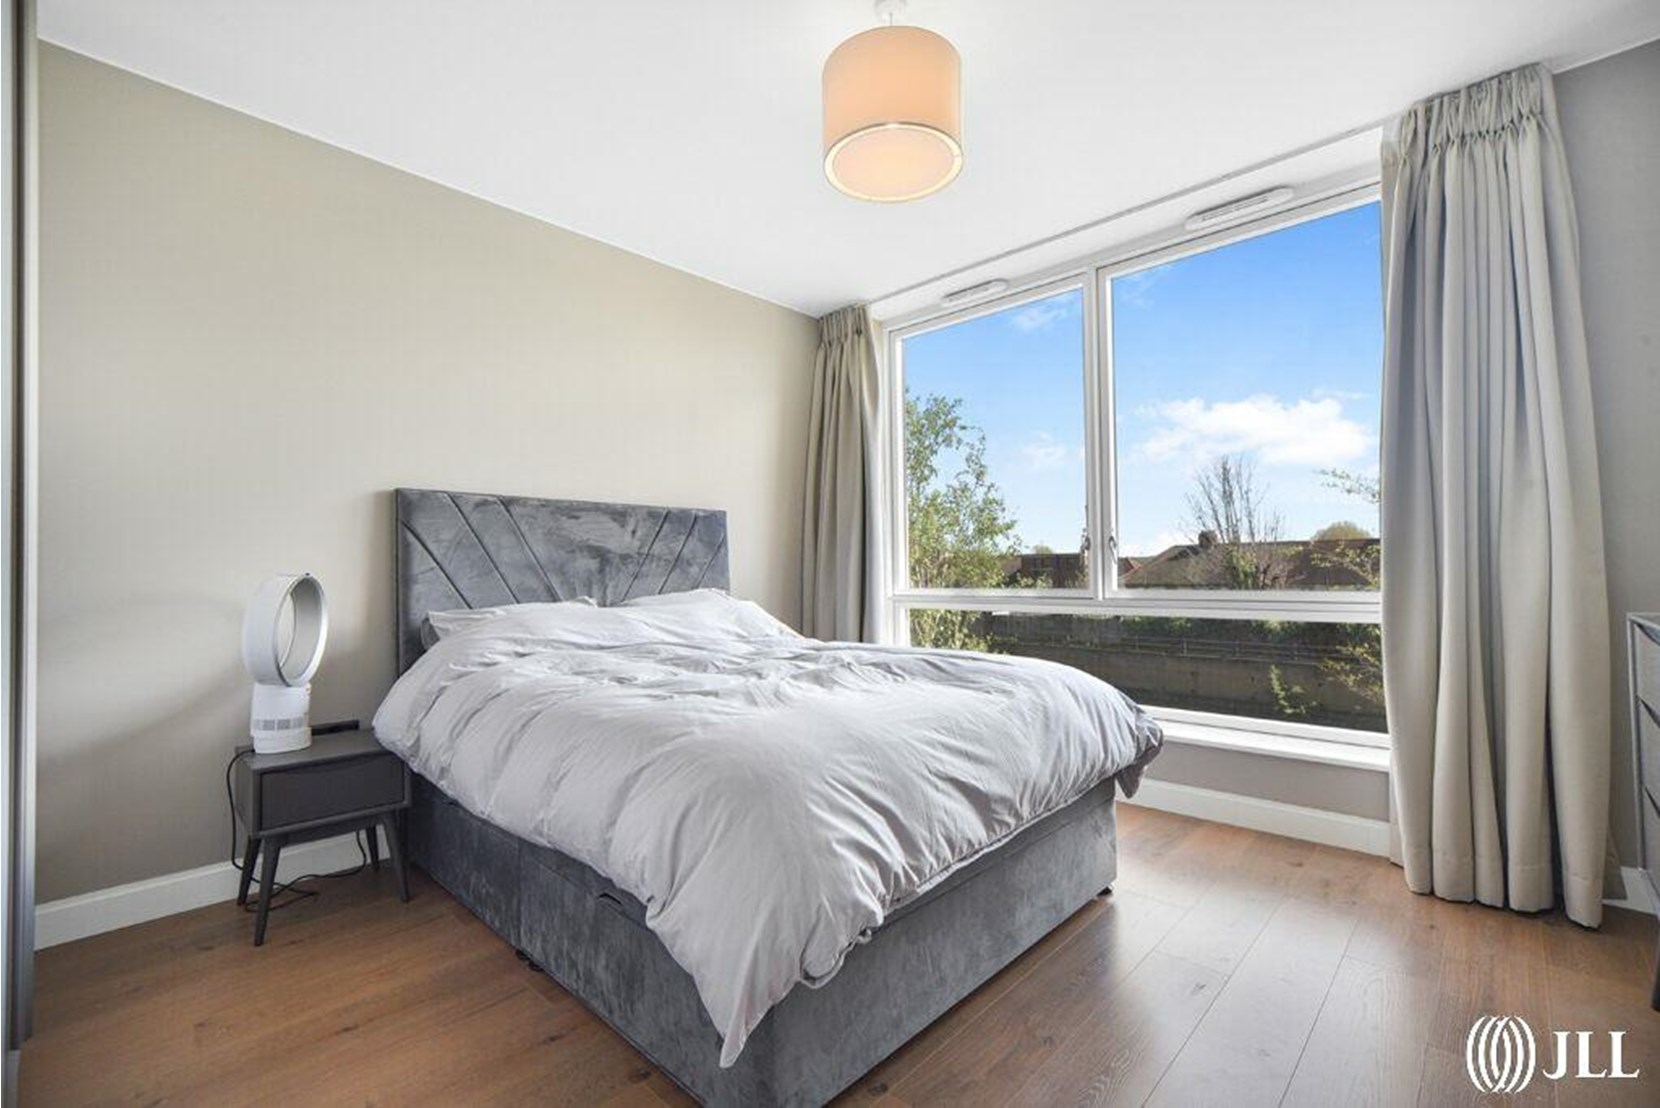 Houses and Apartments to Rent by JLL at Sugar House Island, Newham, E15, bedroom